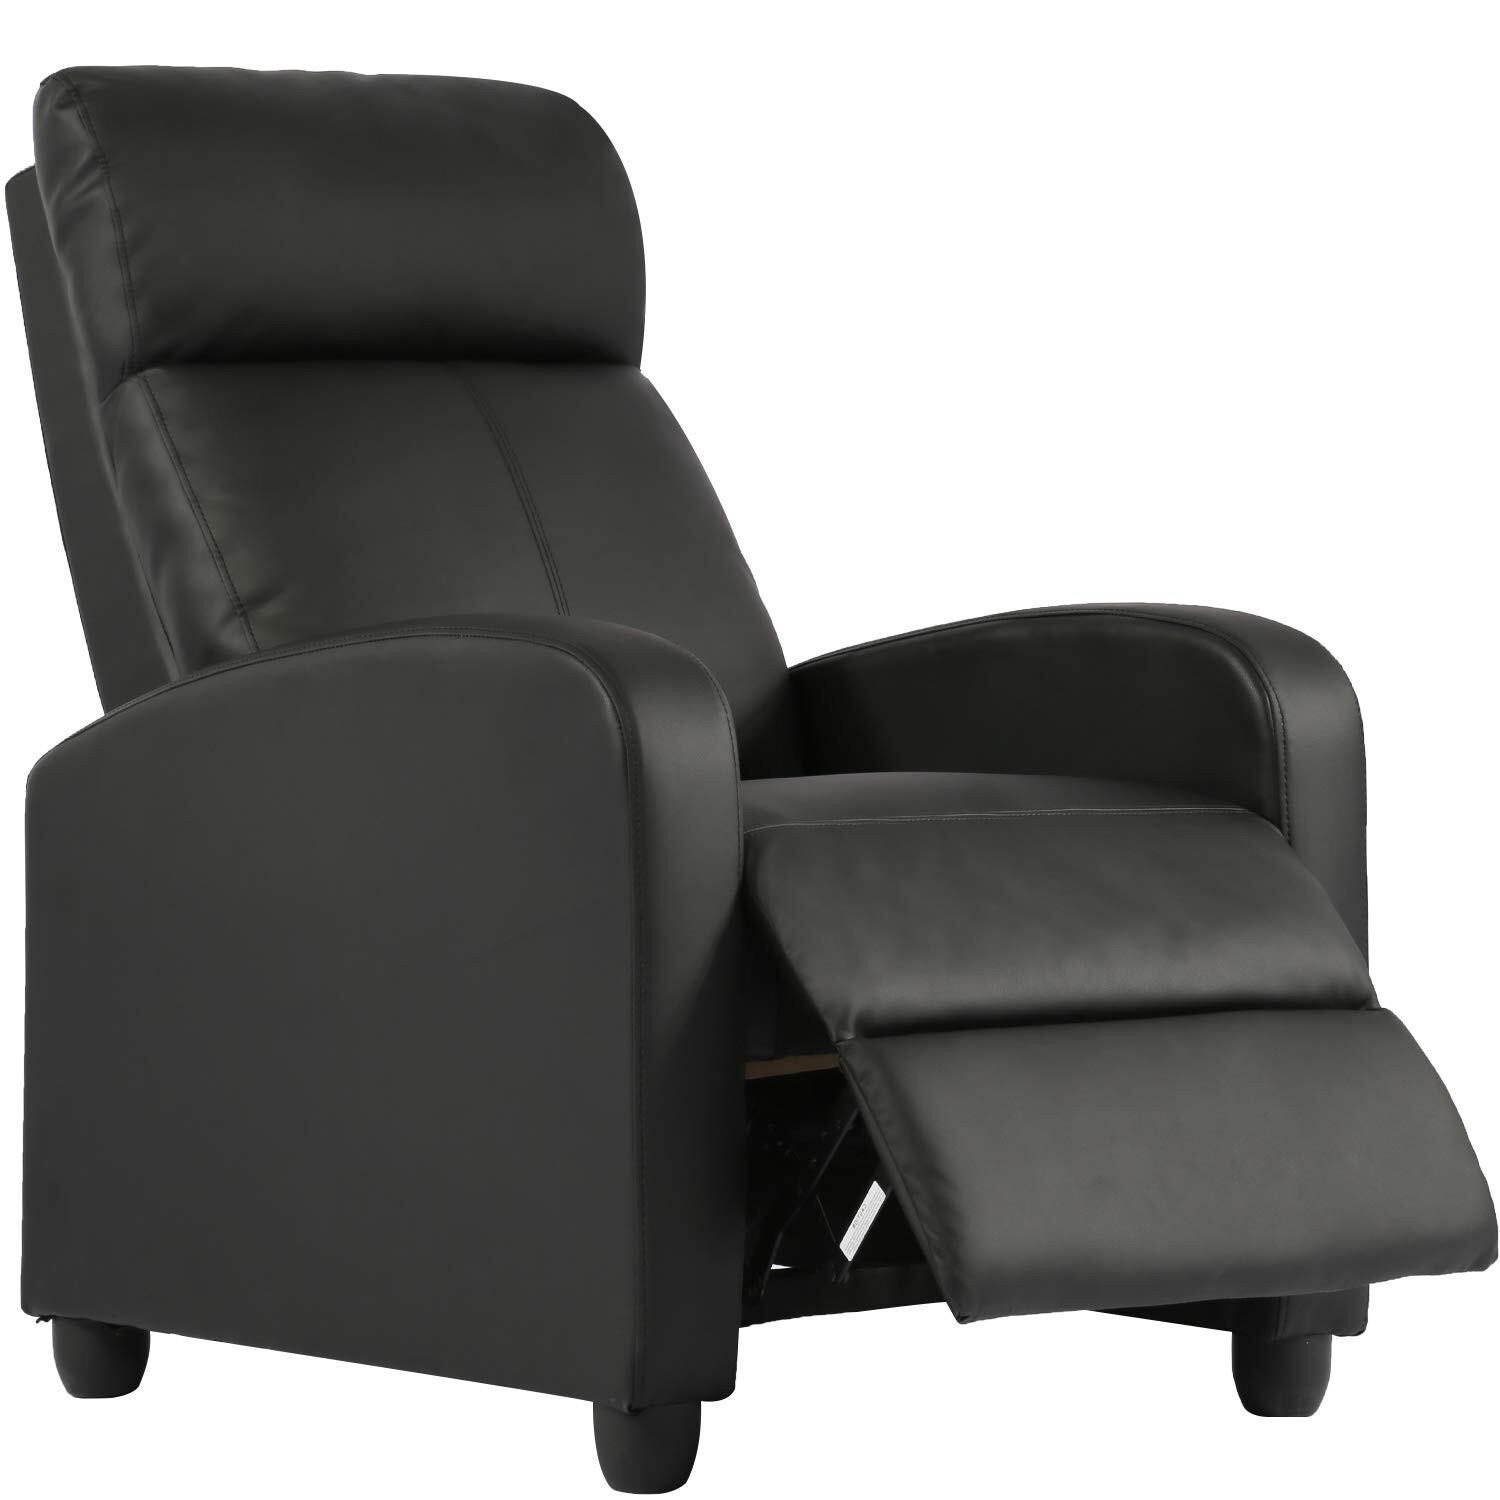 FDW Recliner Chair for Living Room Home Theater Se